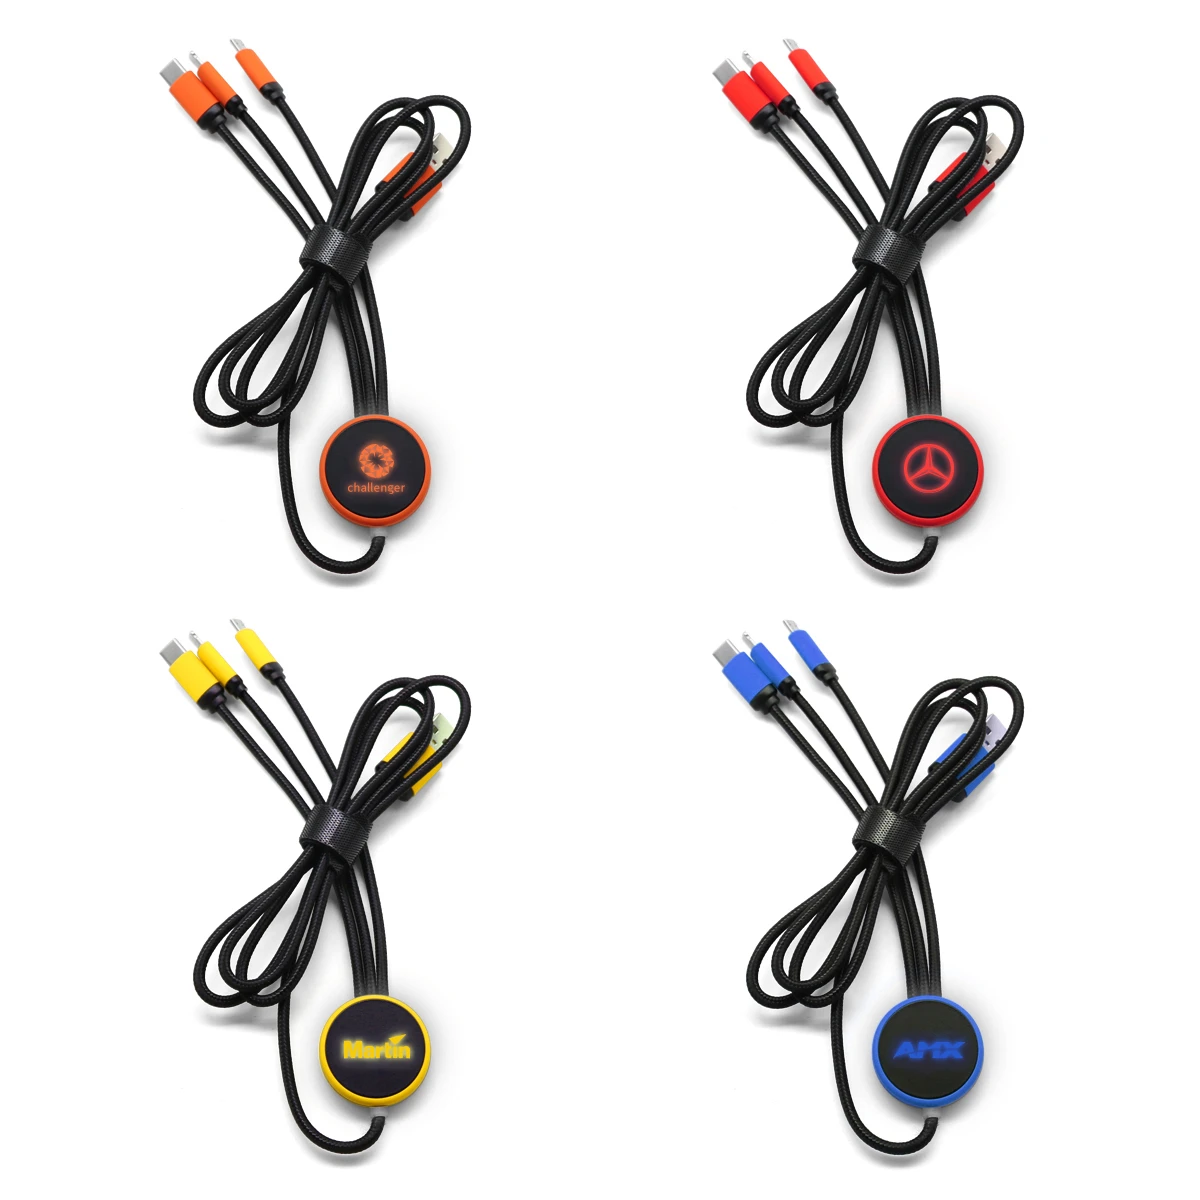 2020 Gadgets Gifts 4 in1 USB Charger Cable With LED Light Up Logo nylon braided 4 in 1 led charging cable for all smartphones